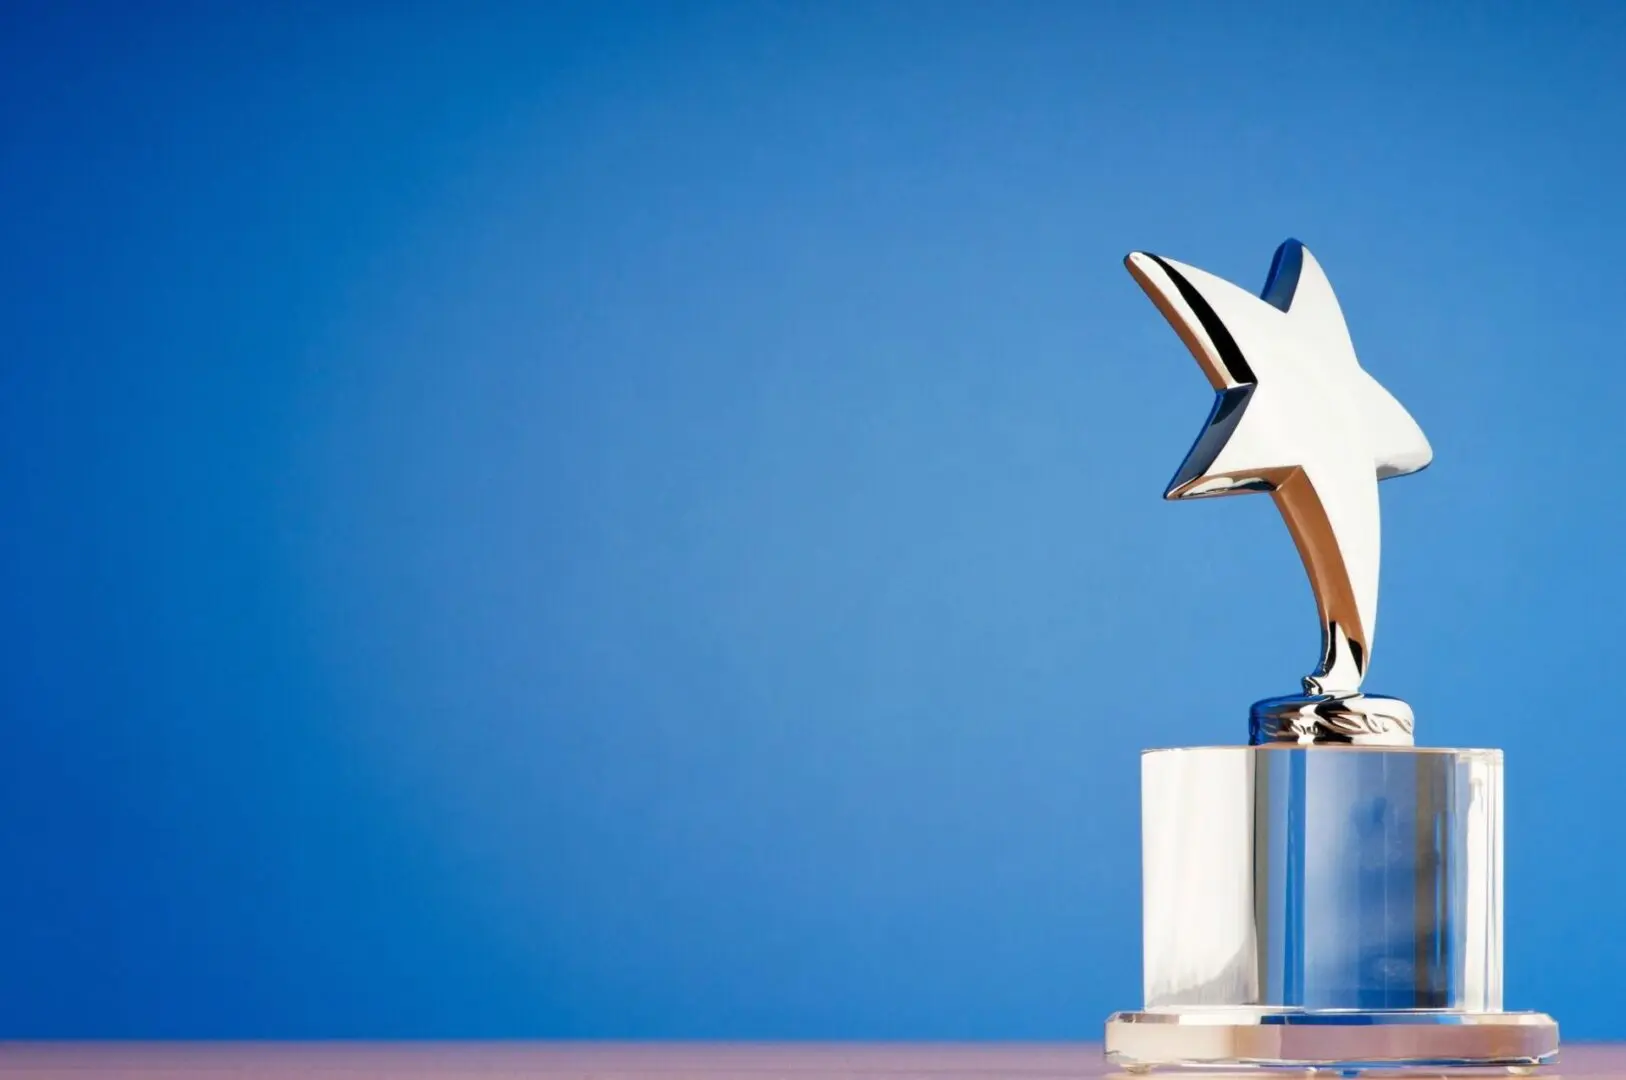 A silver star trophy on a table against a blue background.